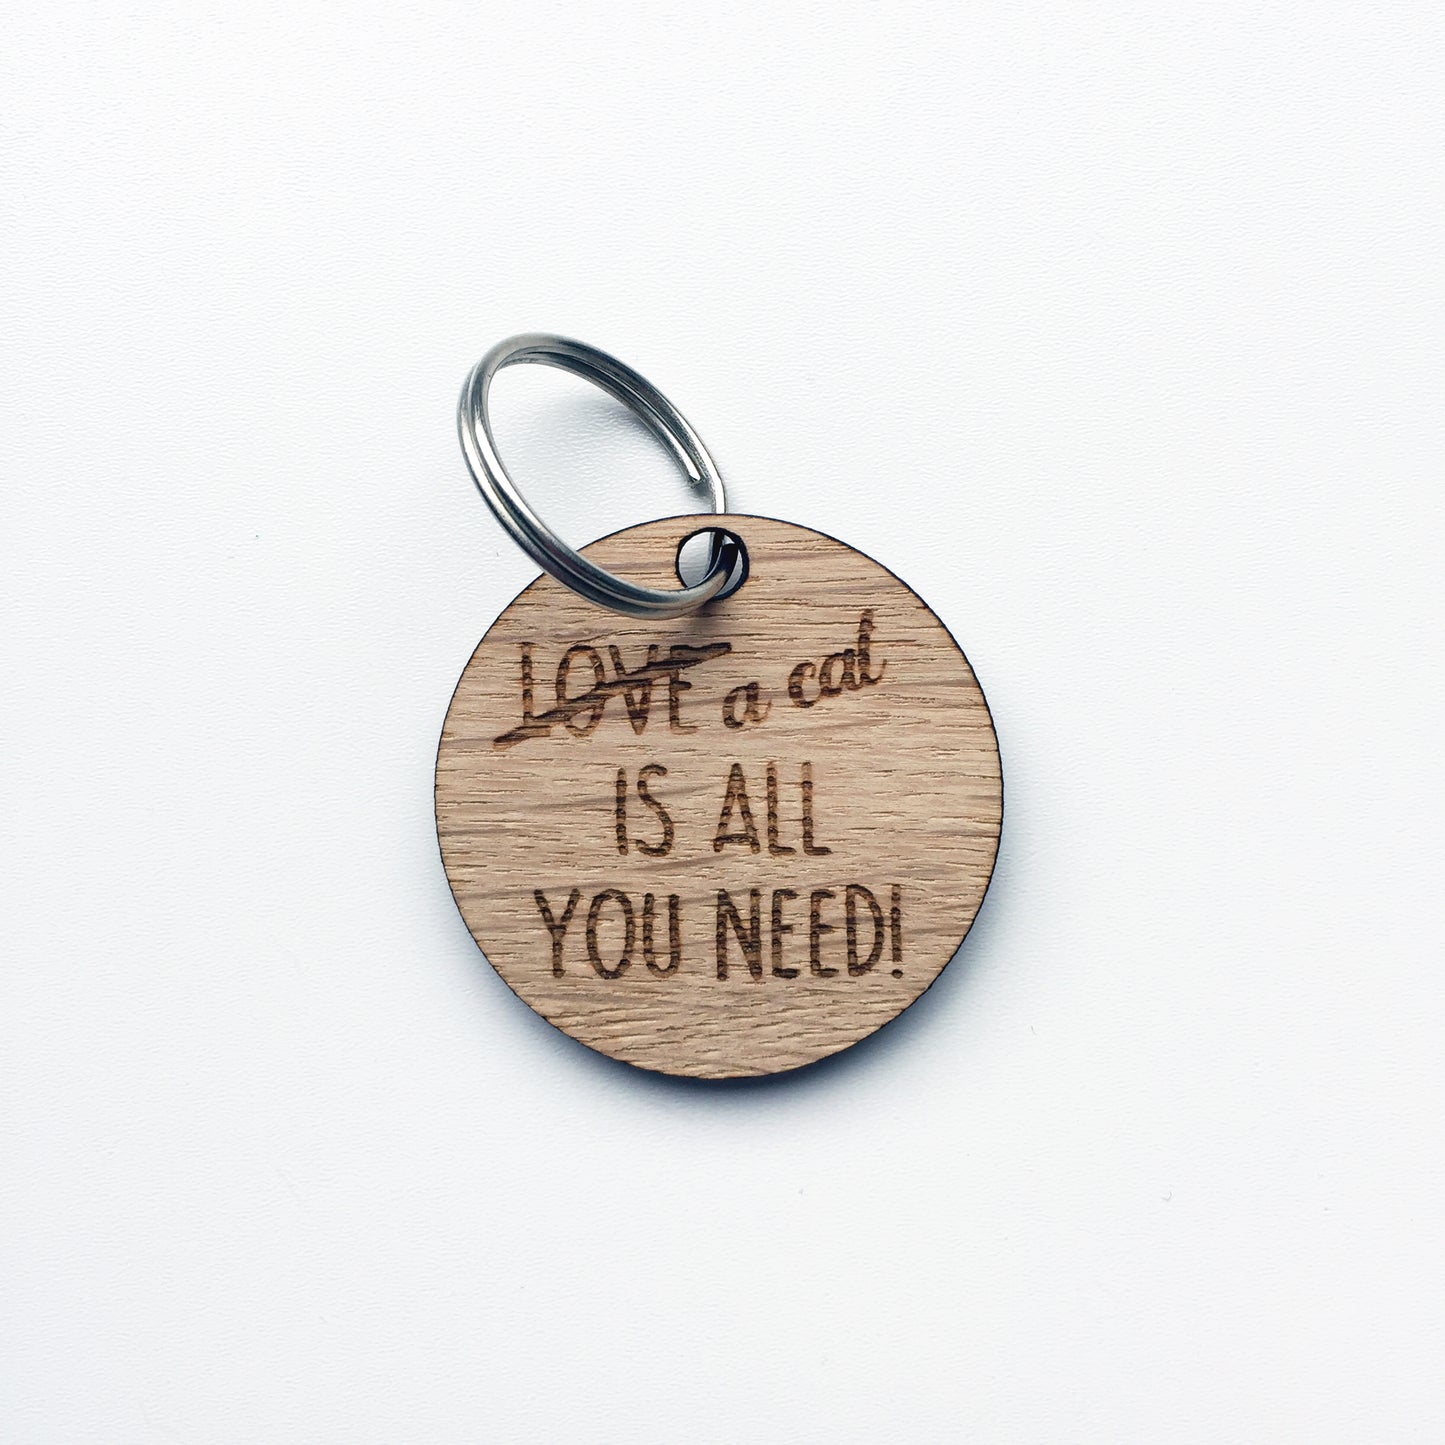 A Cat is all you need Keyring - Sustainable Oak Veneer